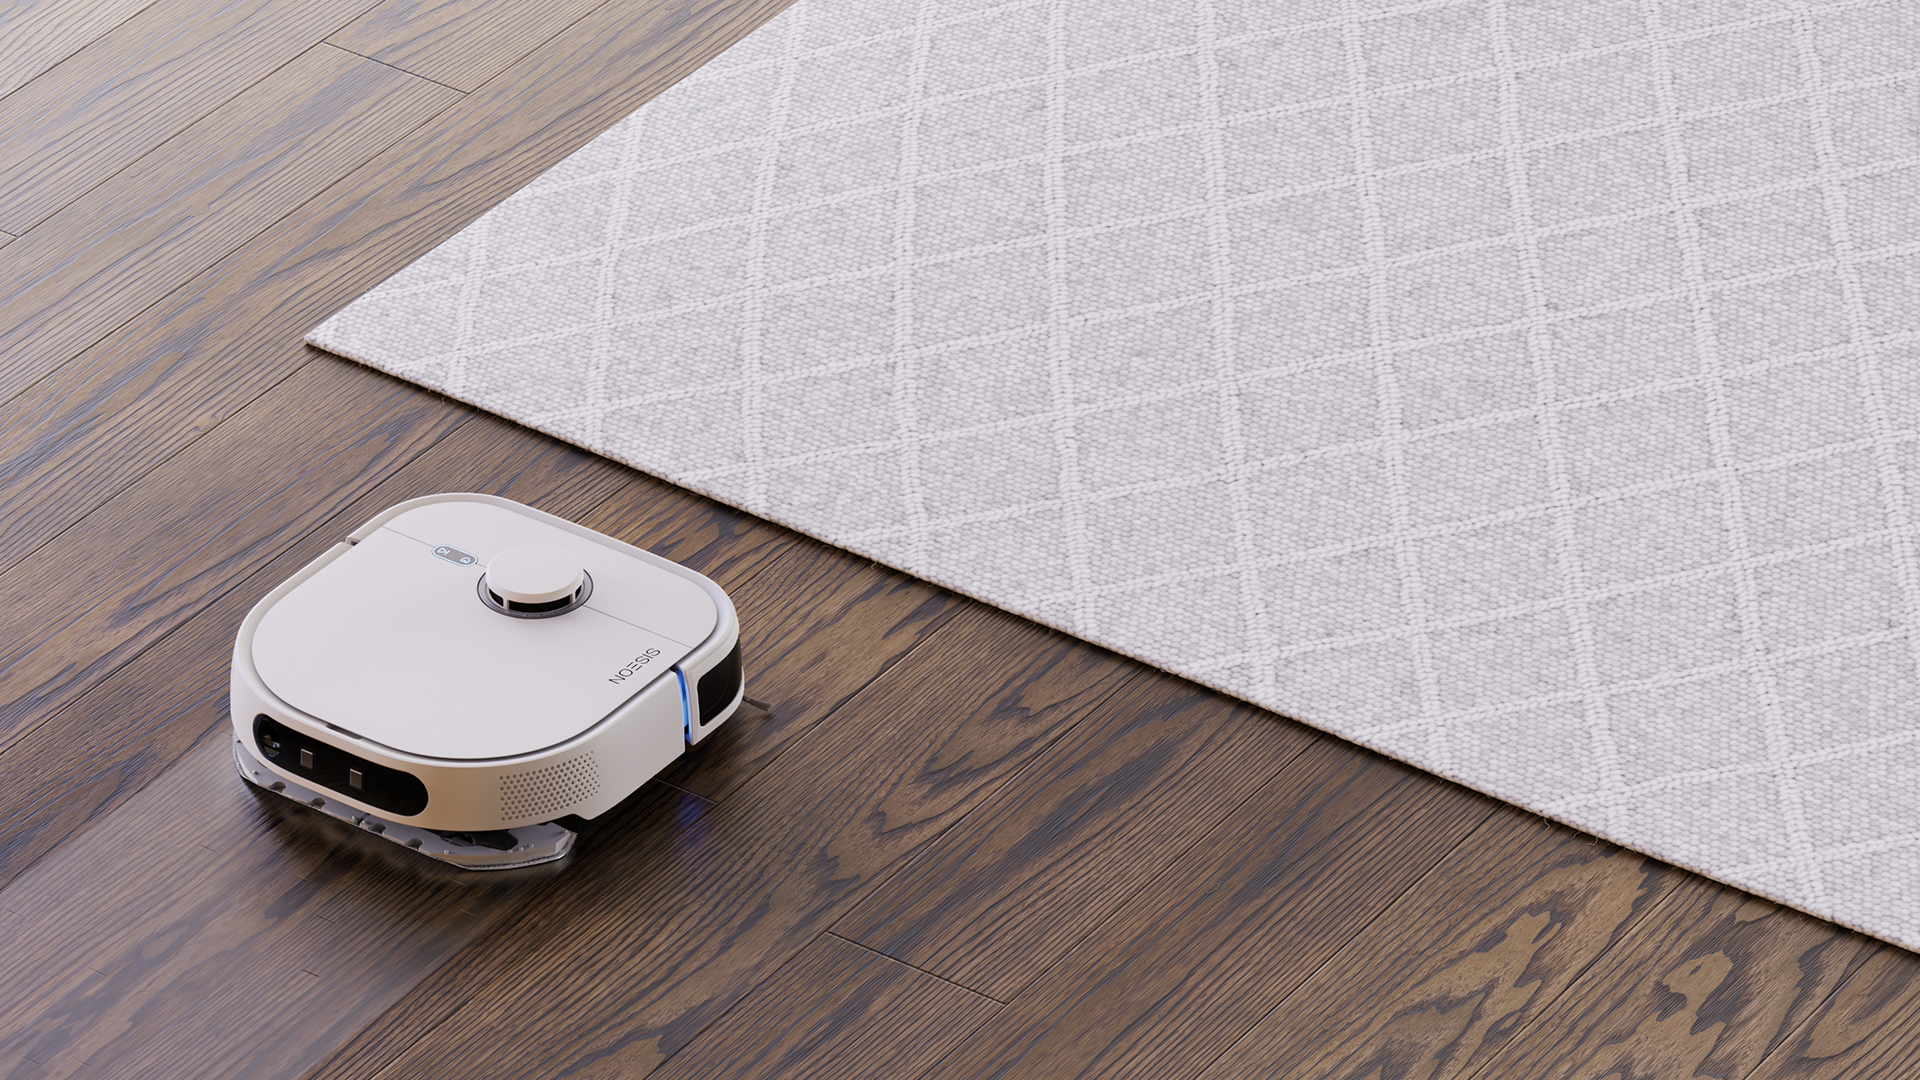 Noesis robot on clean wooden floors next to a grey rug